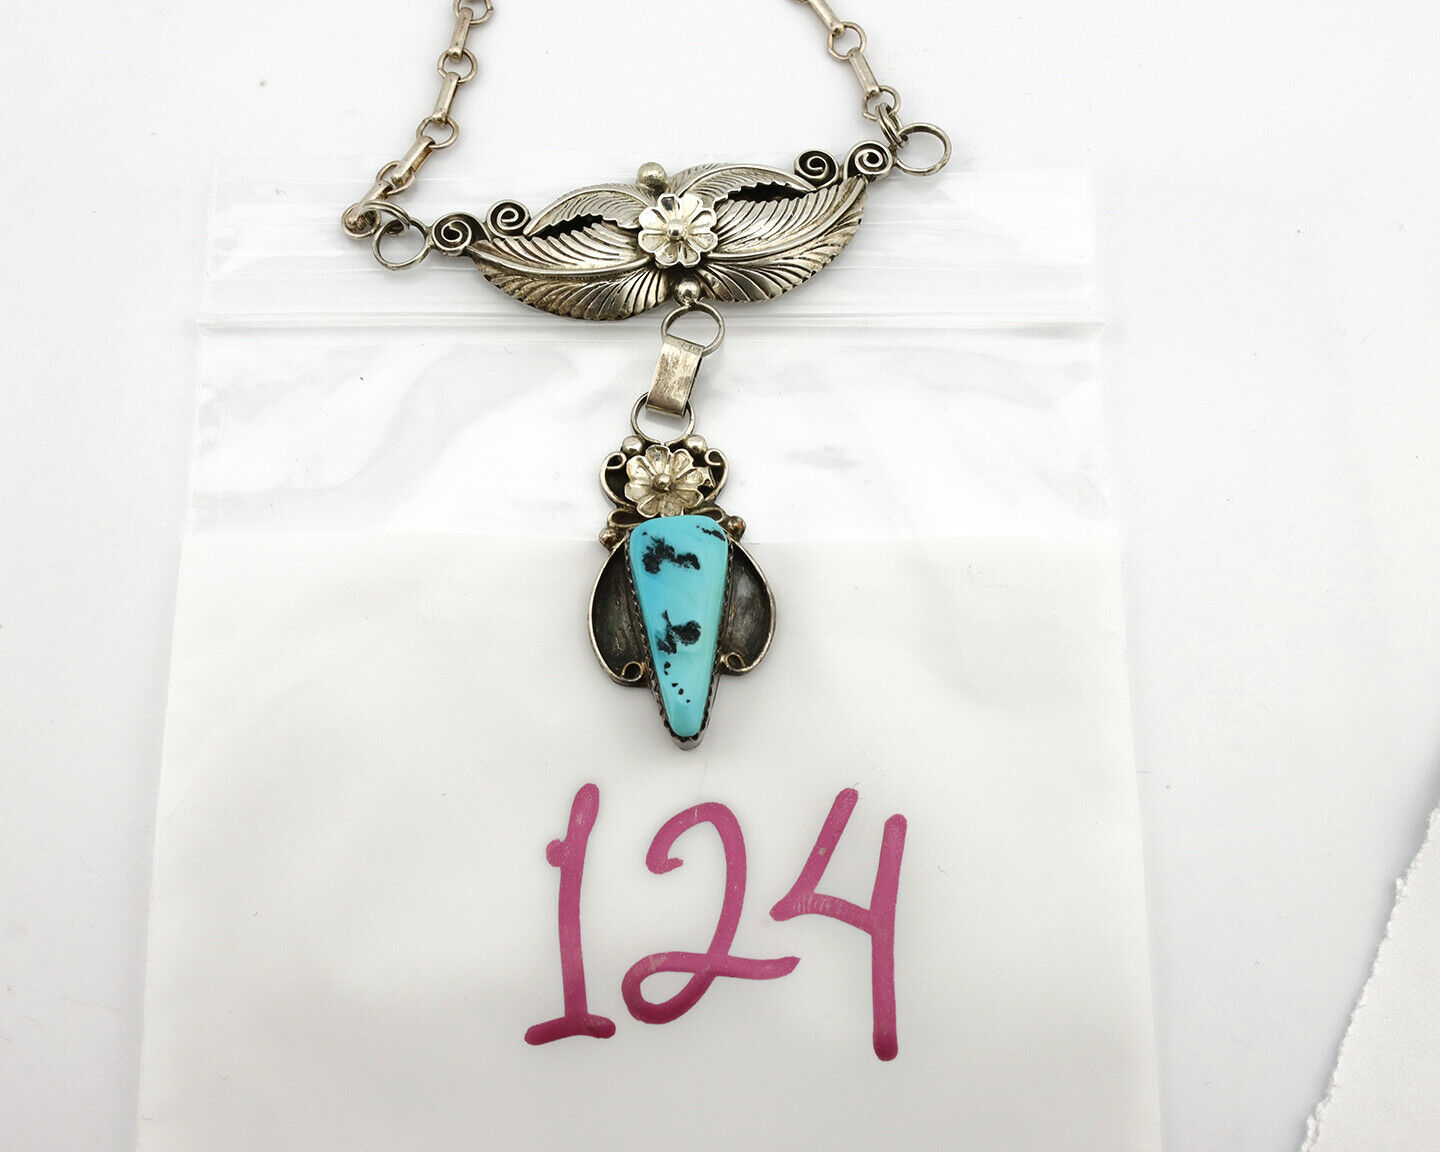 Navajo Necklace .925 Silver Sleeping Beauty Turquoise Signed K C.80's